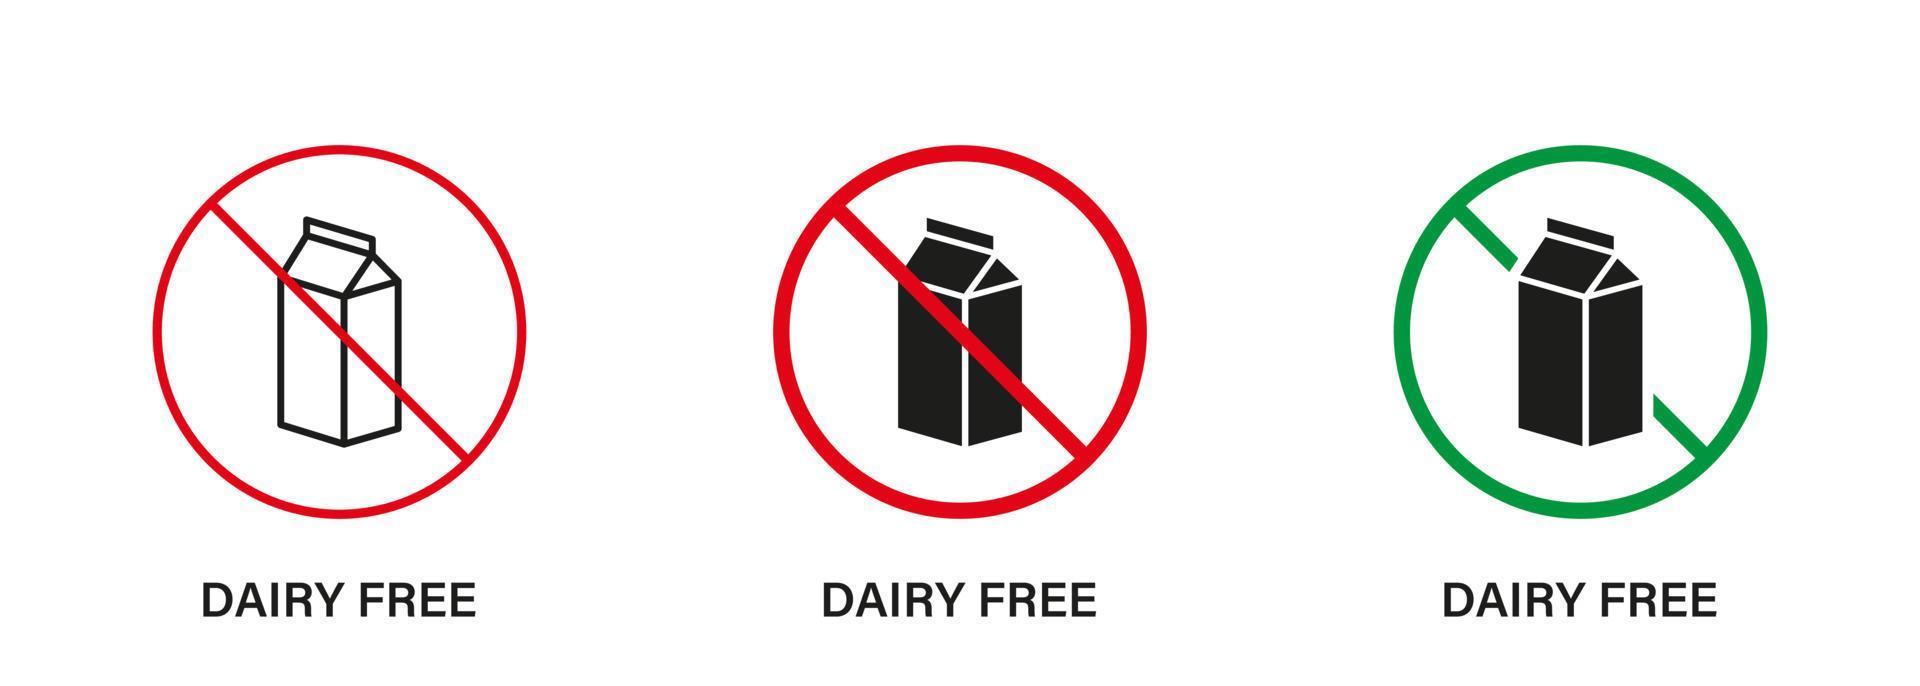 Dairy Free Silhouette and Line Icon Set. Dairy Stop Sign, Only Healthy Food. Cow Milk Lactose Forbidden Symbol. Free Dairy Diet Logo. No Lactose, Allergy Ingredient. Isolated Vector Illustration.